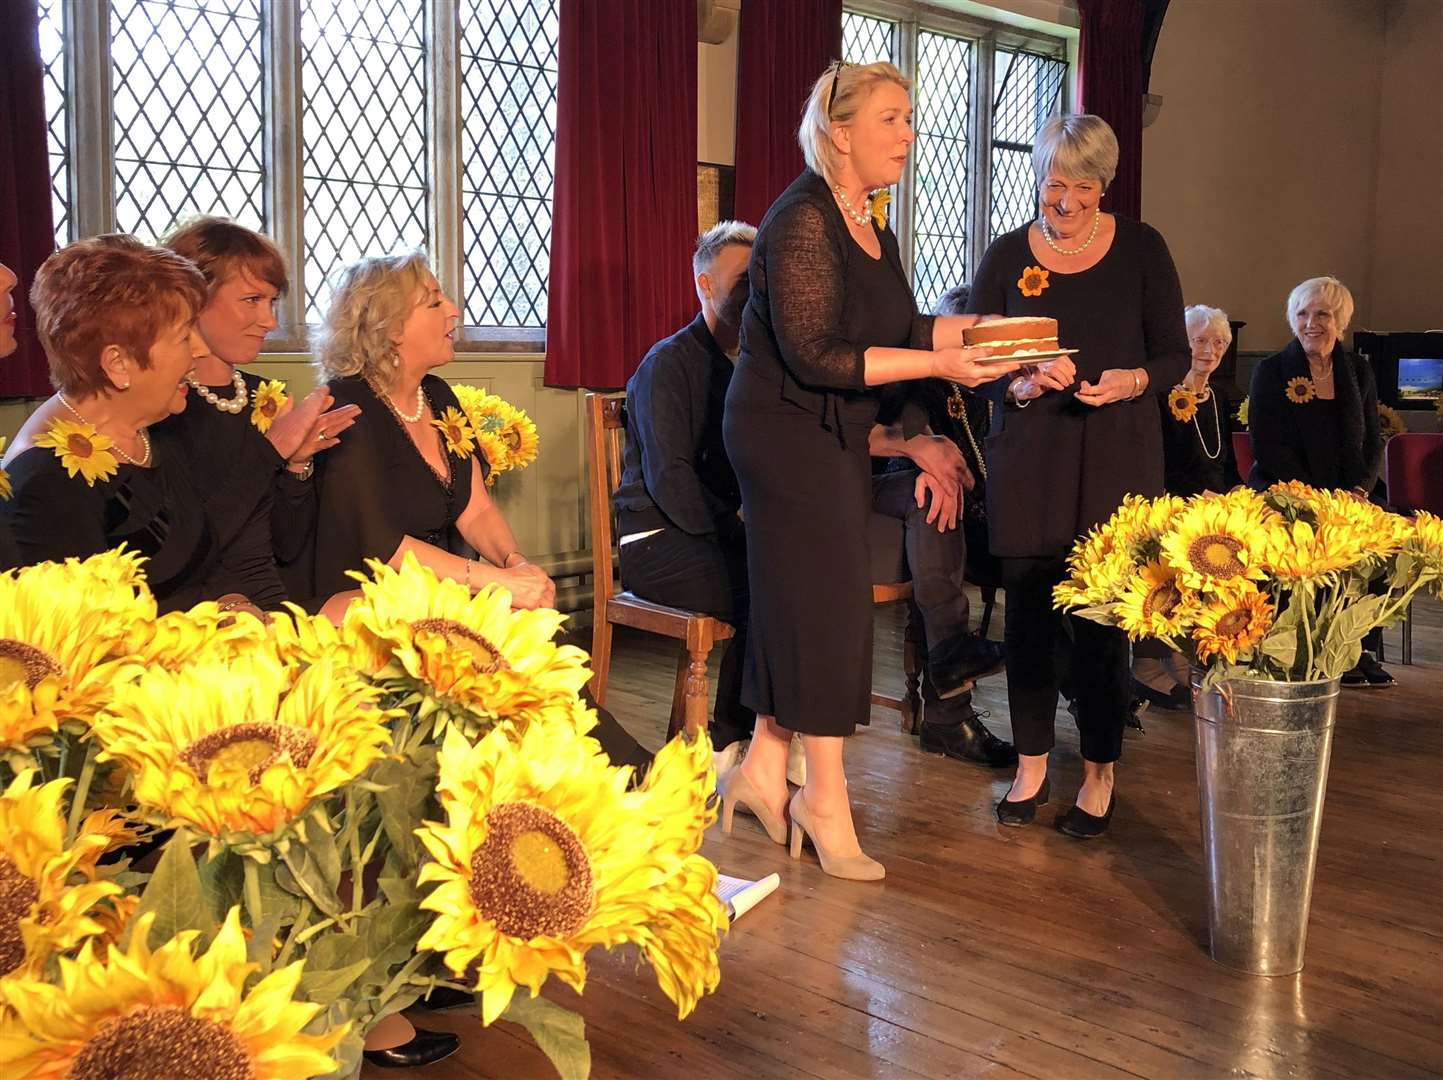 Fern Britton is presented with a cake by one of the original Calendar Girls (2043548)